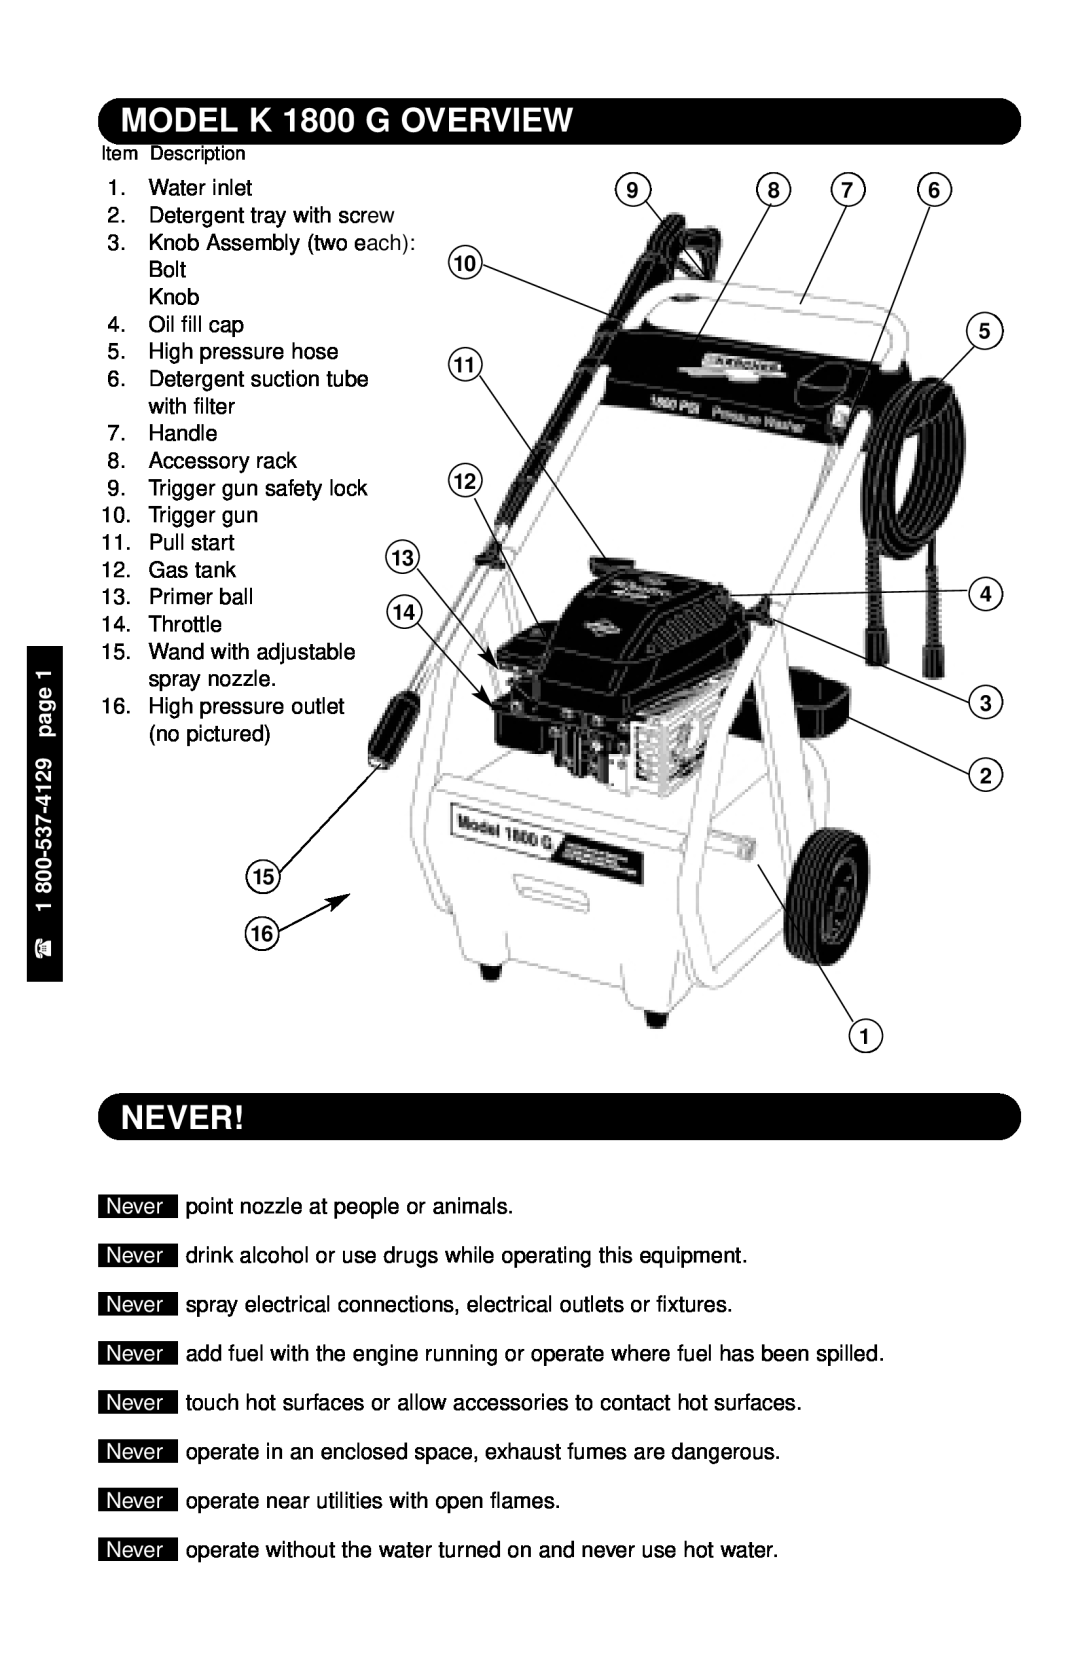 Karcher specifications MODEL K 1800 G OVERVIEW, Never, 537-4129page, 10 5 11 12, point nozzle at people or animals 